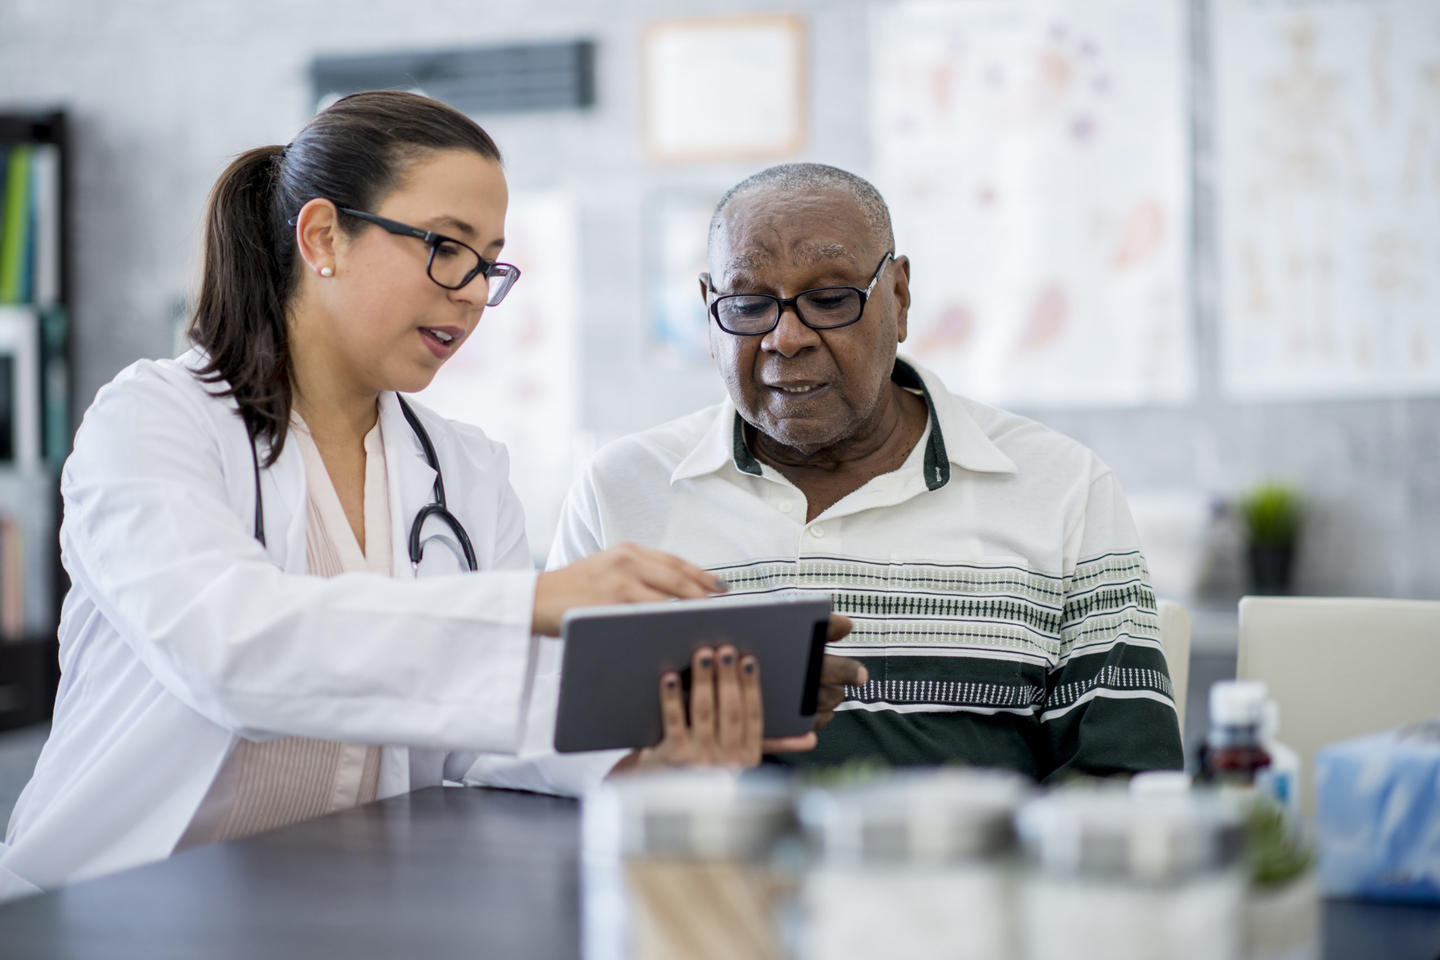 A doctor explains something on a tablet to an older gentleman